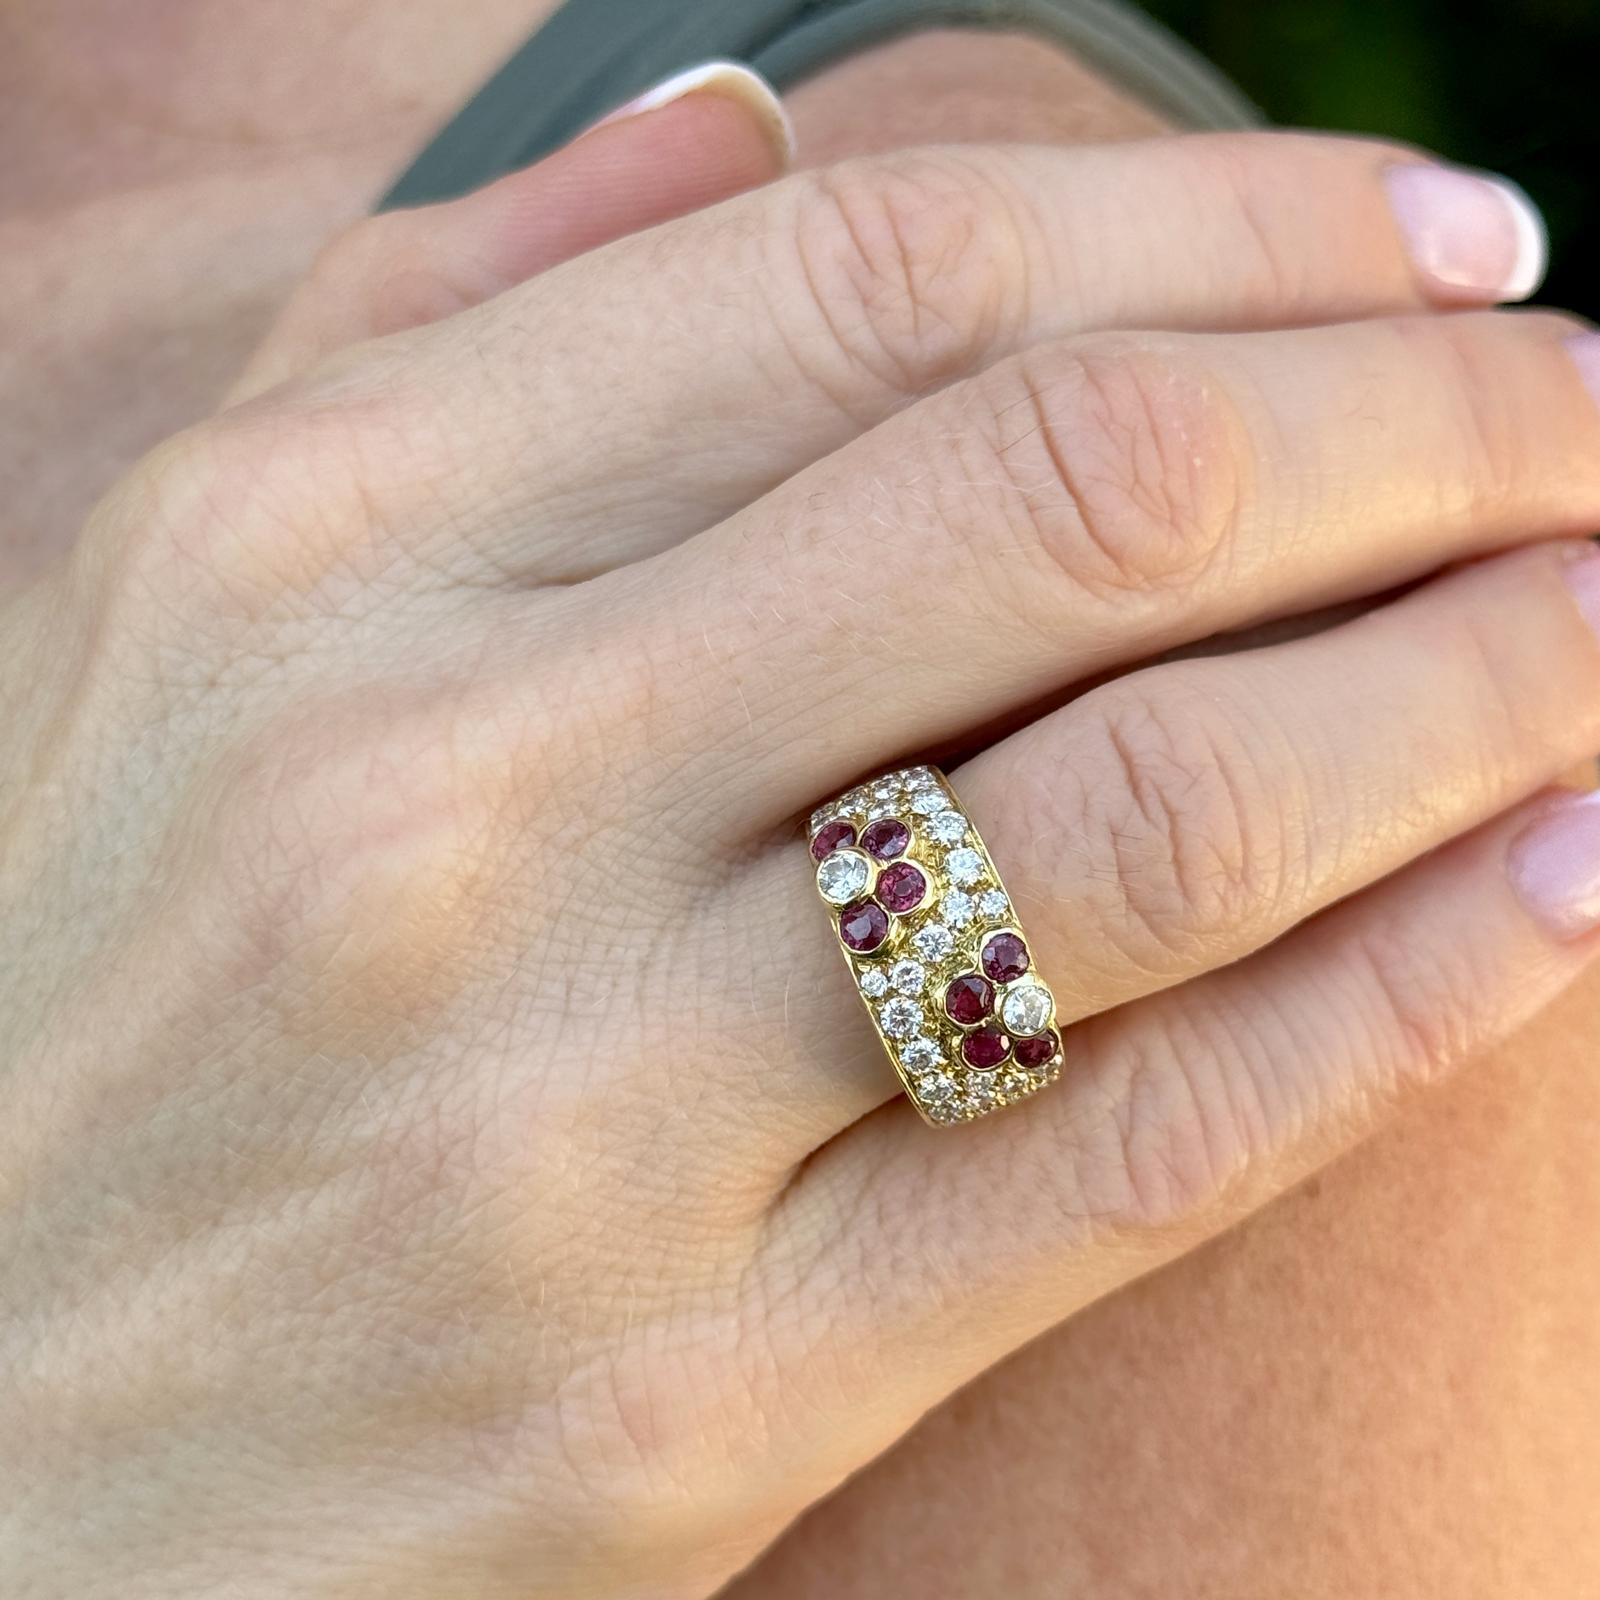 The modern diamond ruby floral design 18 karat yellow gold band ring is a stunning piece of jewelry that seamlessly blends elegance with contemporary flair. It features 31 genuine diamonds and 8 rubies meticulously set within the gold band, adding